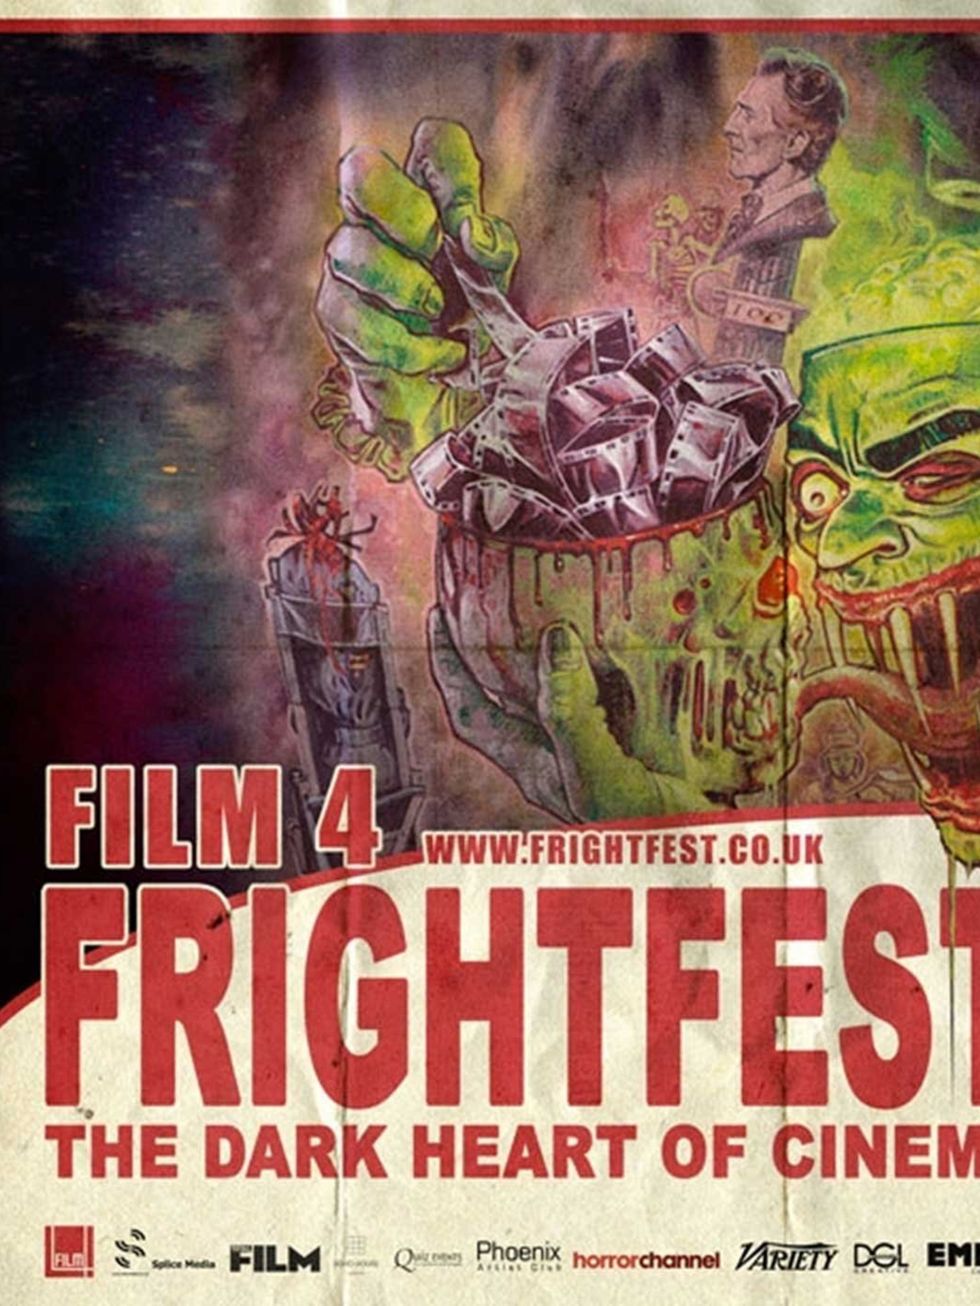 <p><strong>Film4 Frightfest</strong></p><p>The UKs biggest and best fantasy and horror film festival FrightFest returns to the heart of the West End this Bank Holiday weekend with a record 51 fear inducing films. Get your weekly fill of blood and gore at